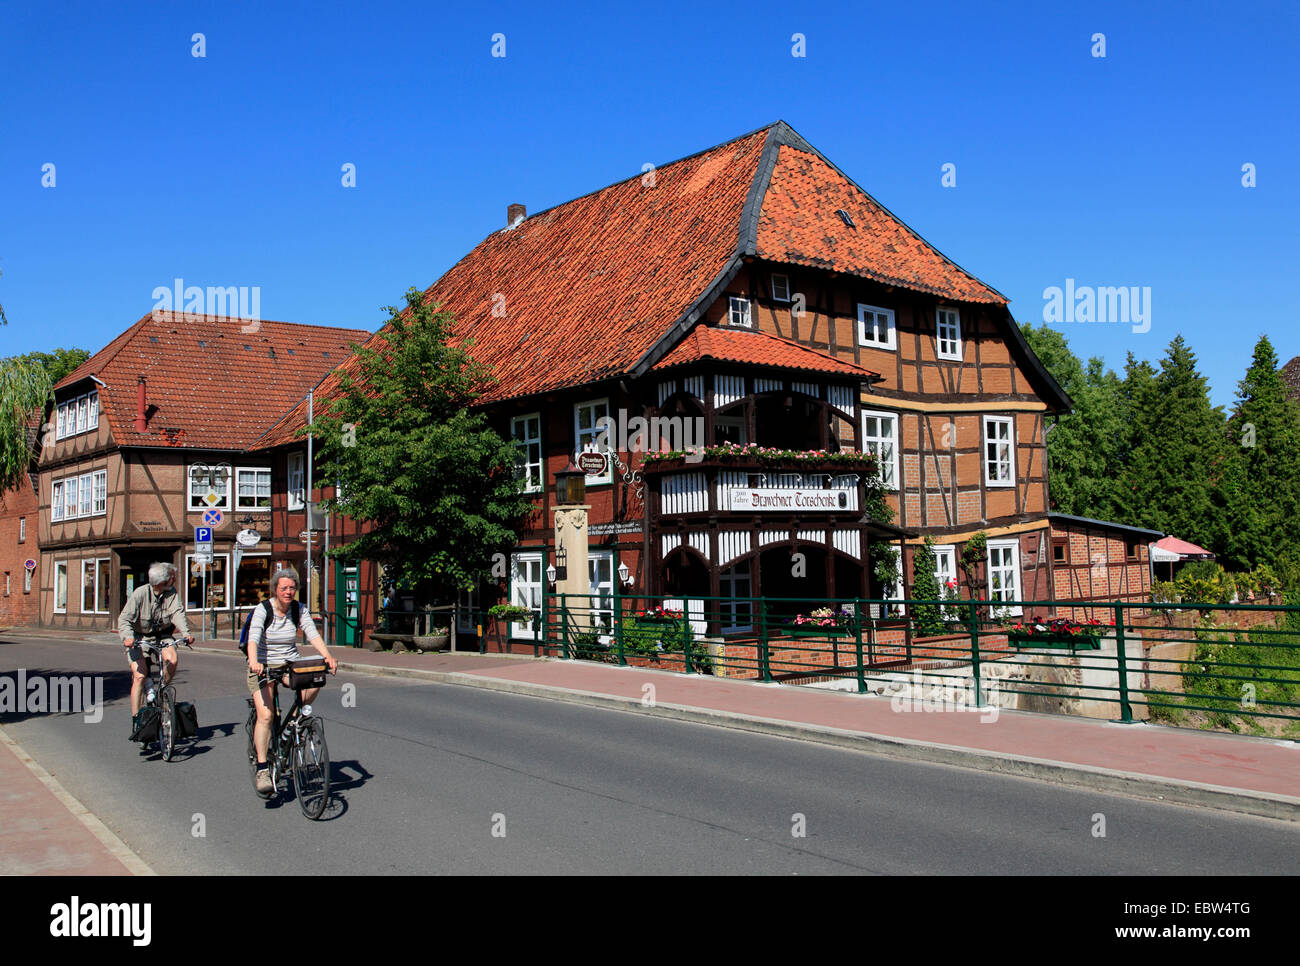 Cyclists at Elbe river cycle route, Hitzacker / Elbe, Wendland, Lower Saxony, Germany, Europe Stock Photo